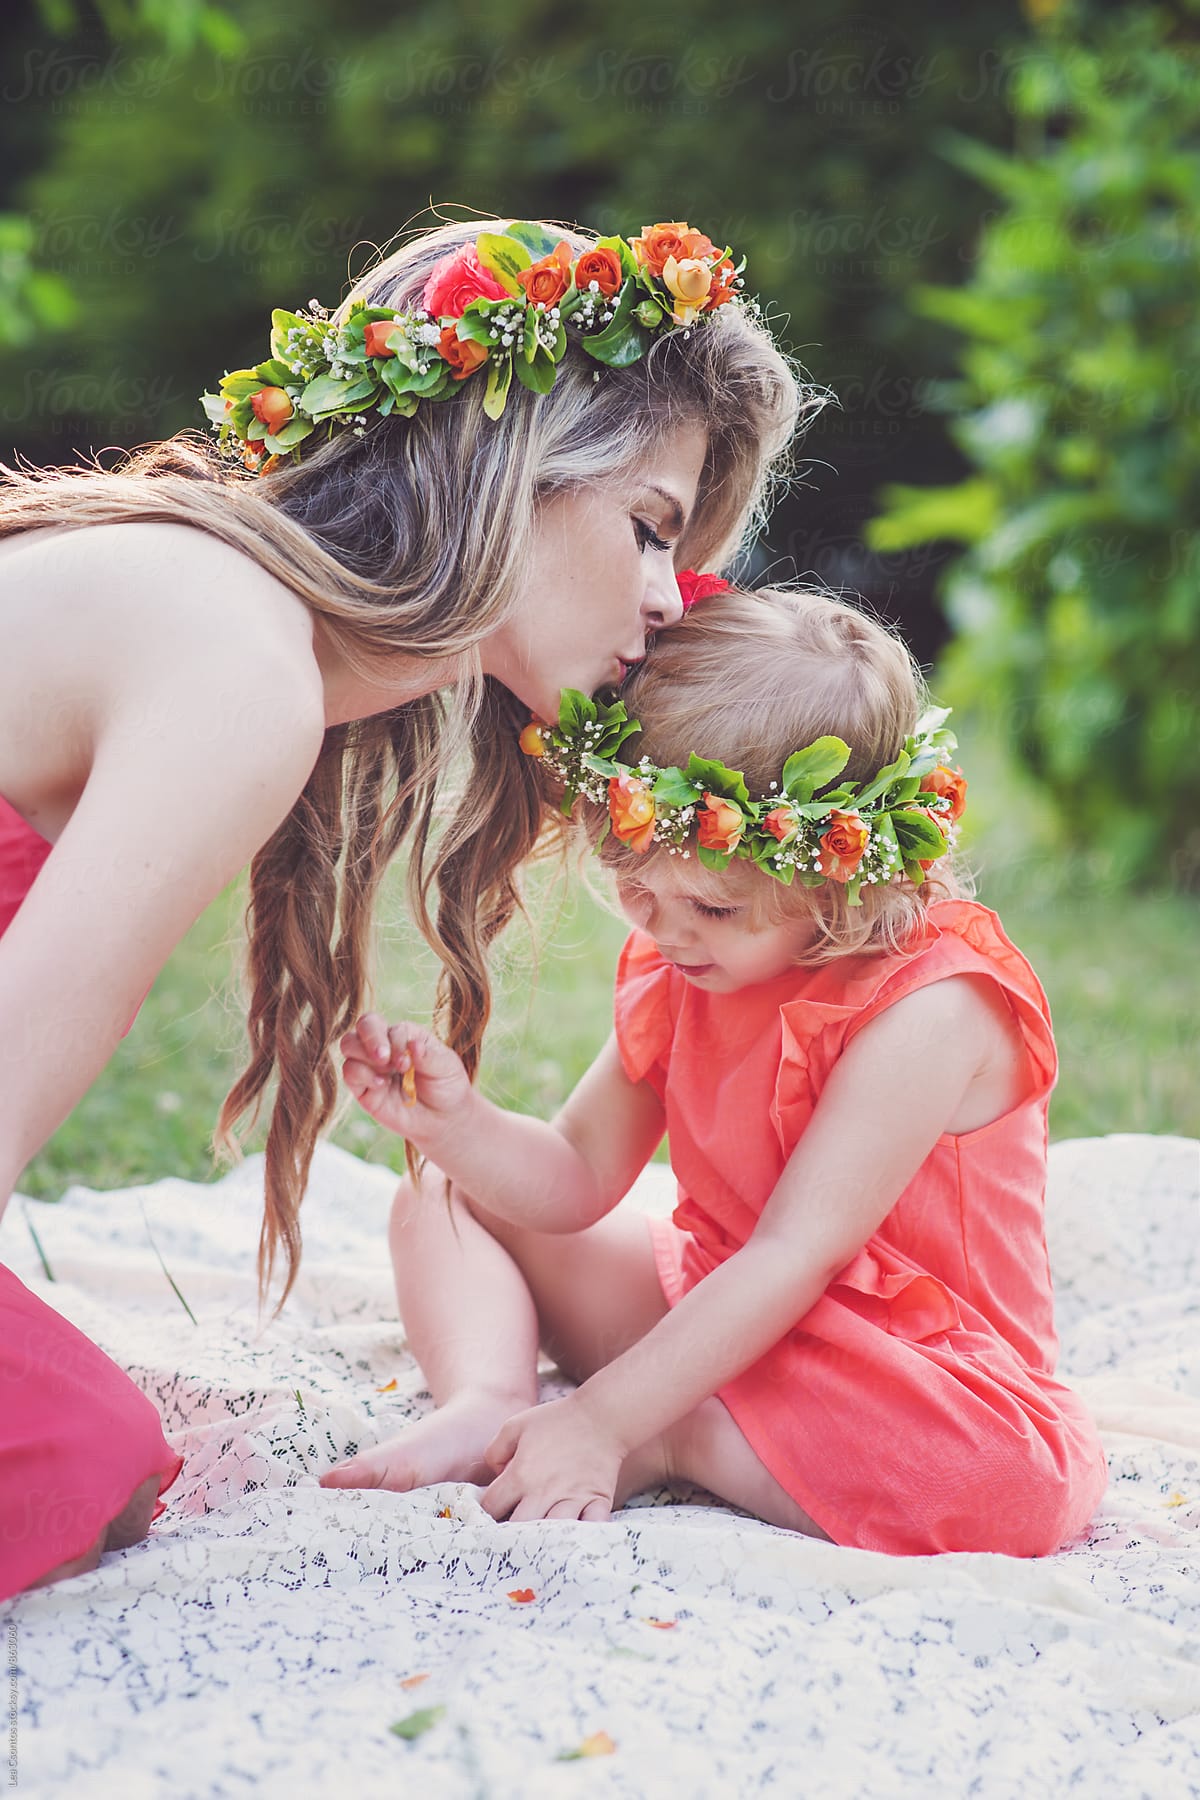 View Beautiful Mother Kissing Her Lovely Daughters Head Both Wearing